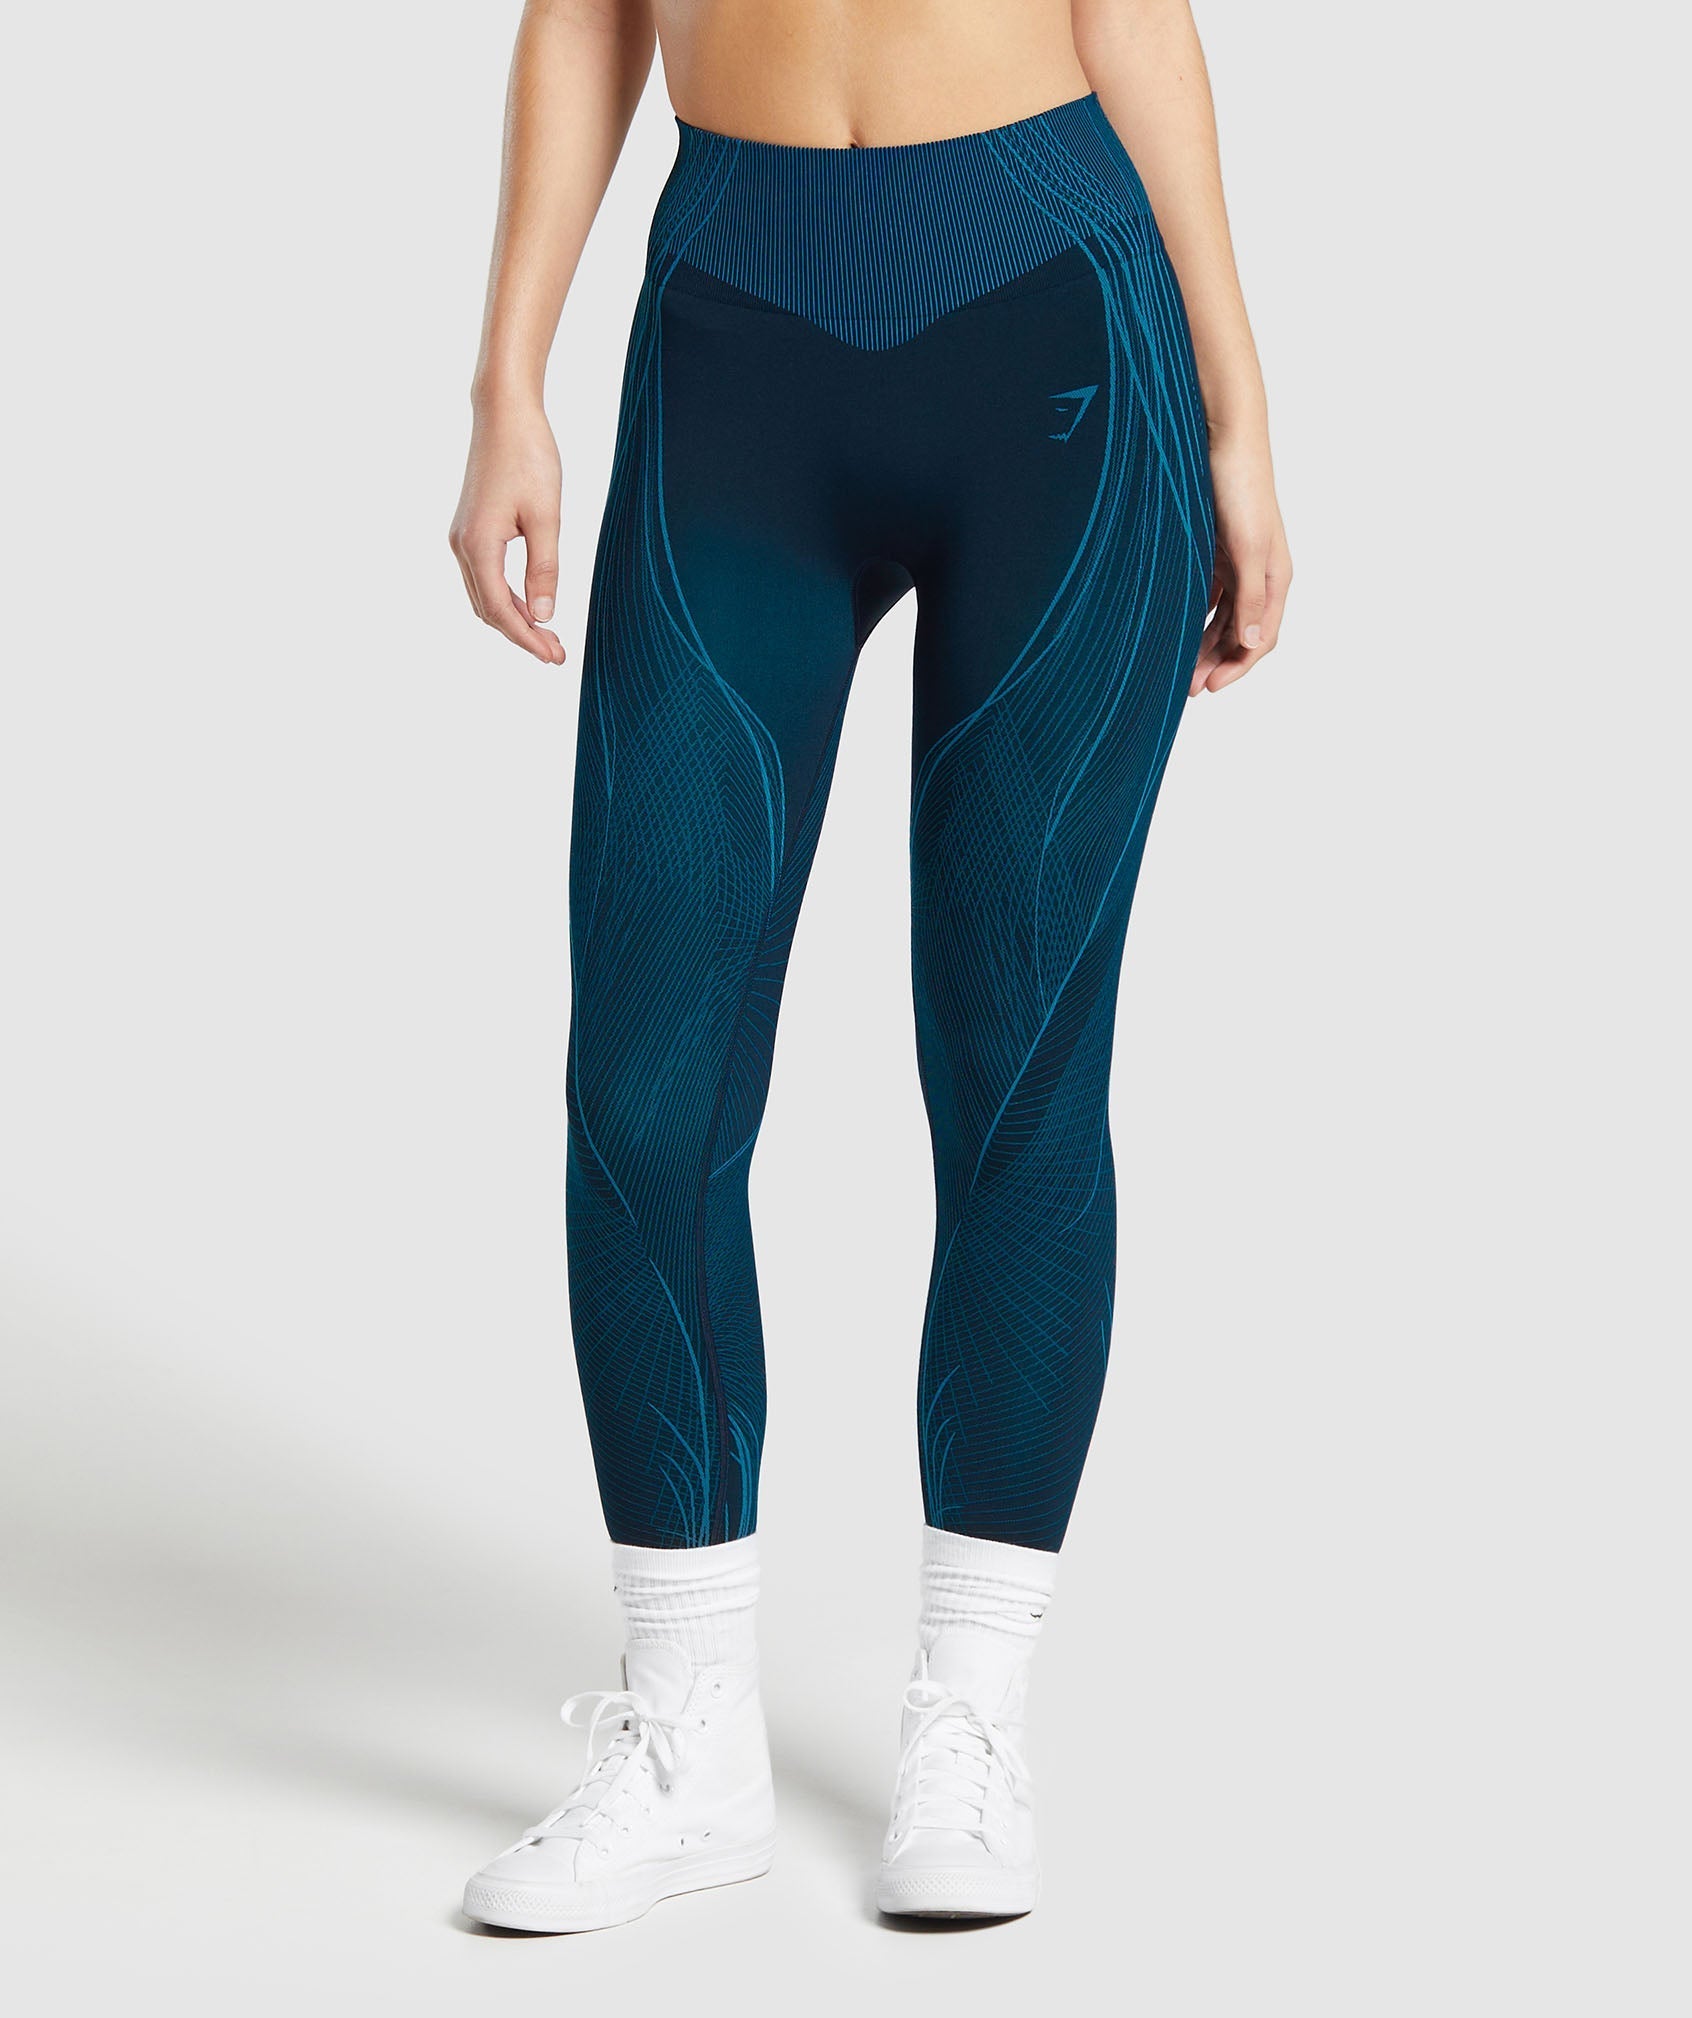 GS x Analis Leggings in Midnight Blue/Lats Blue - view 1